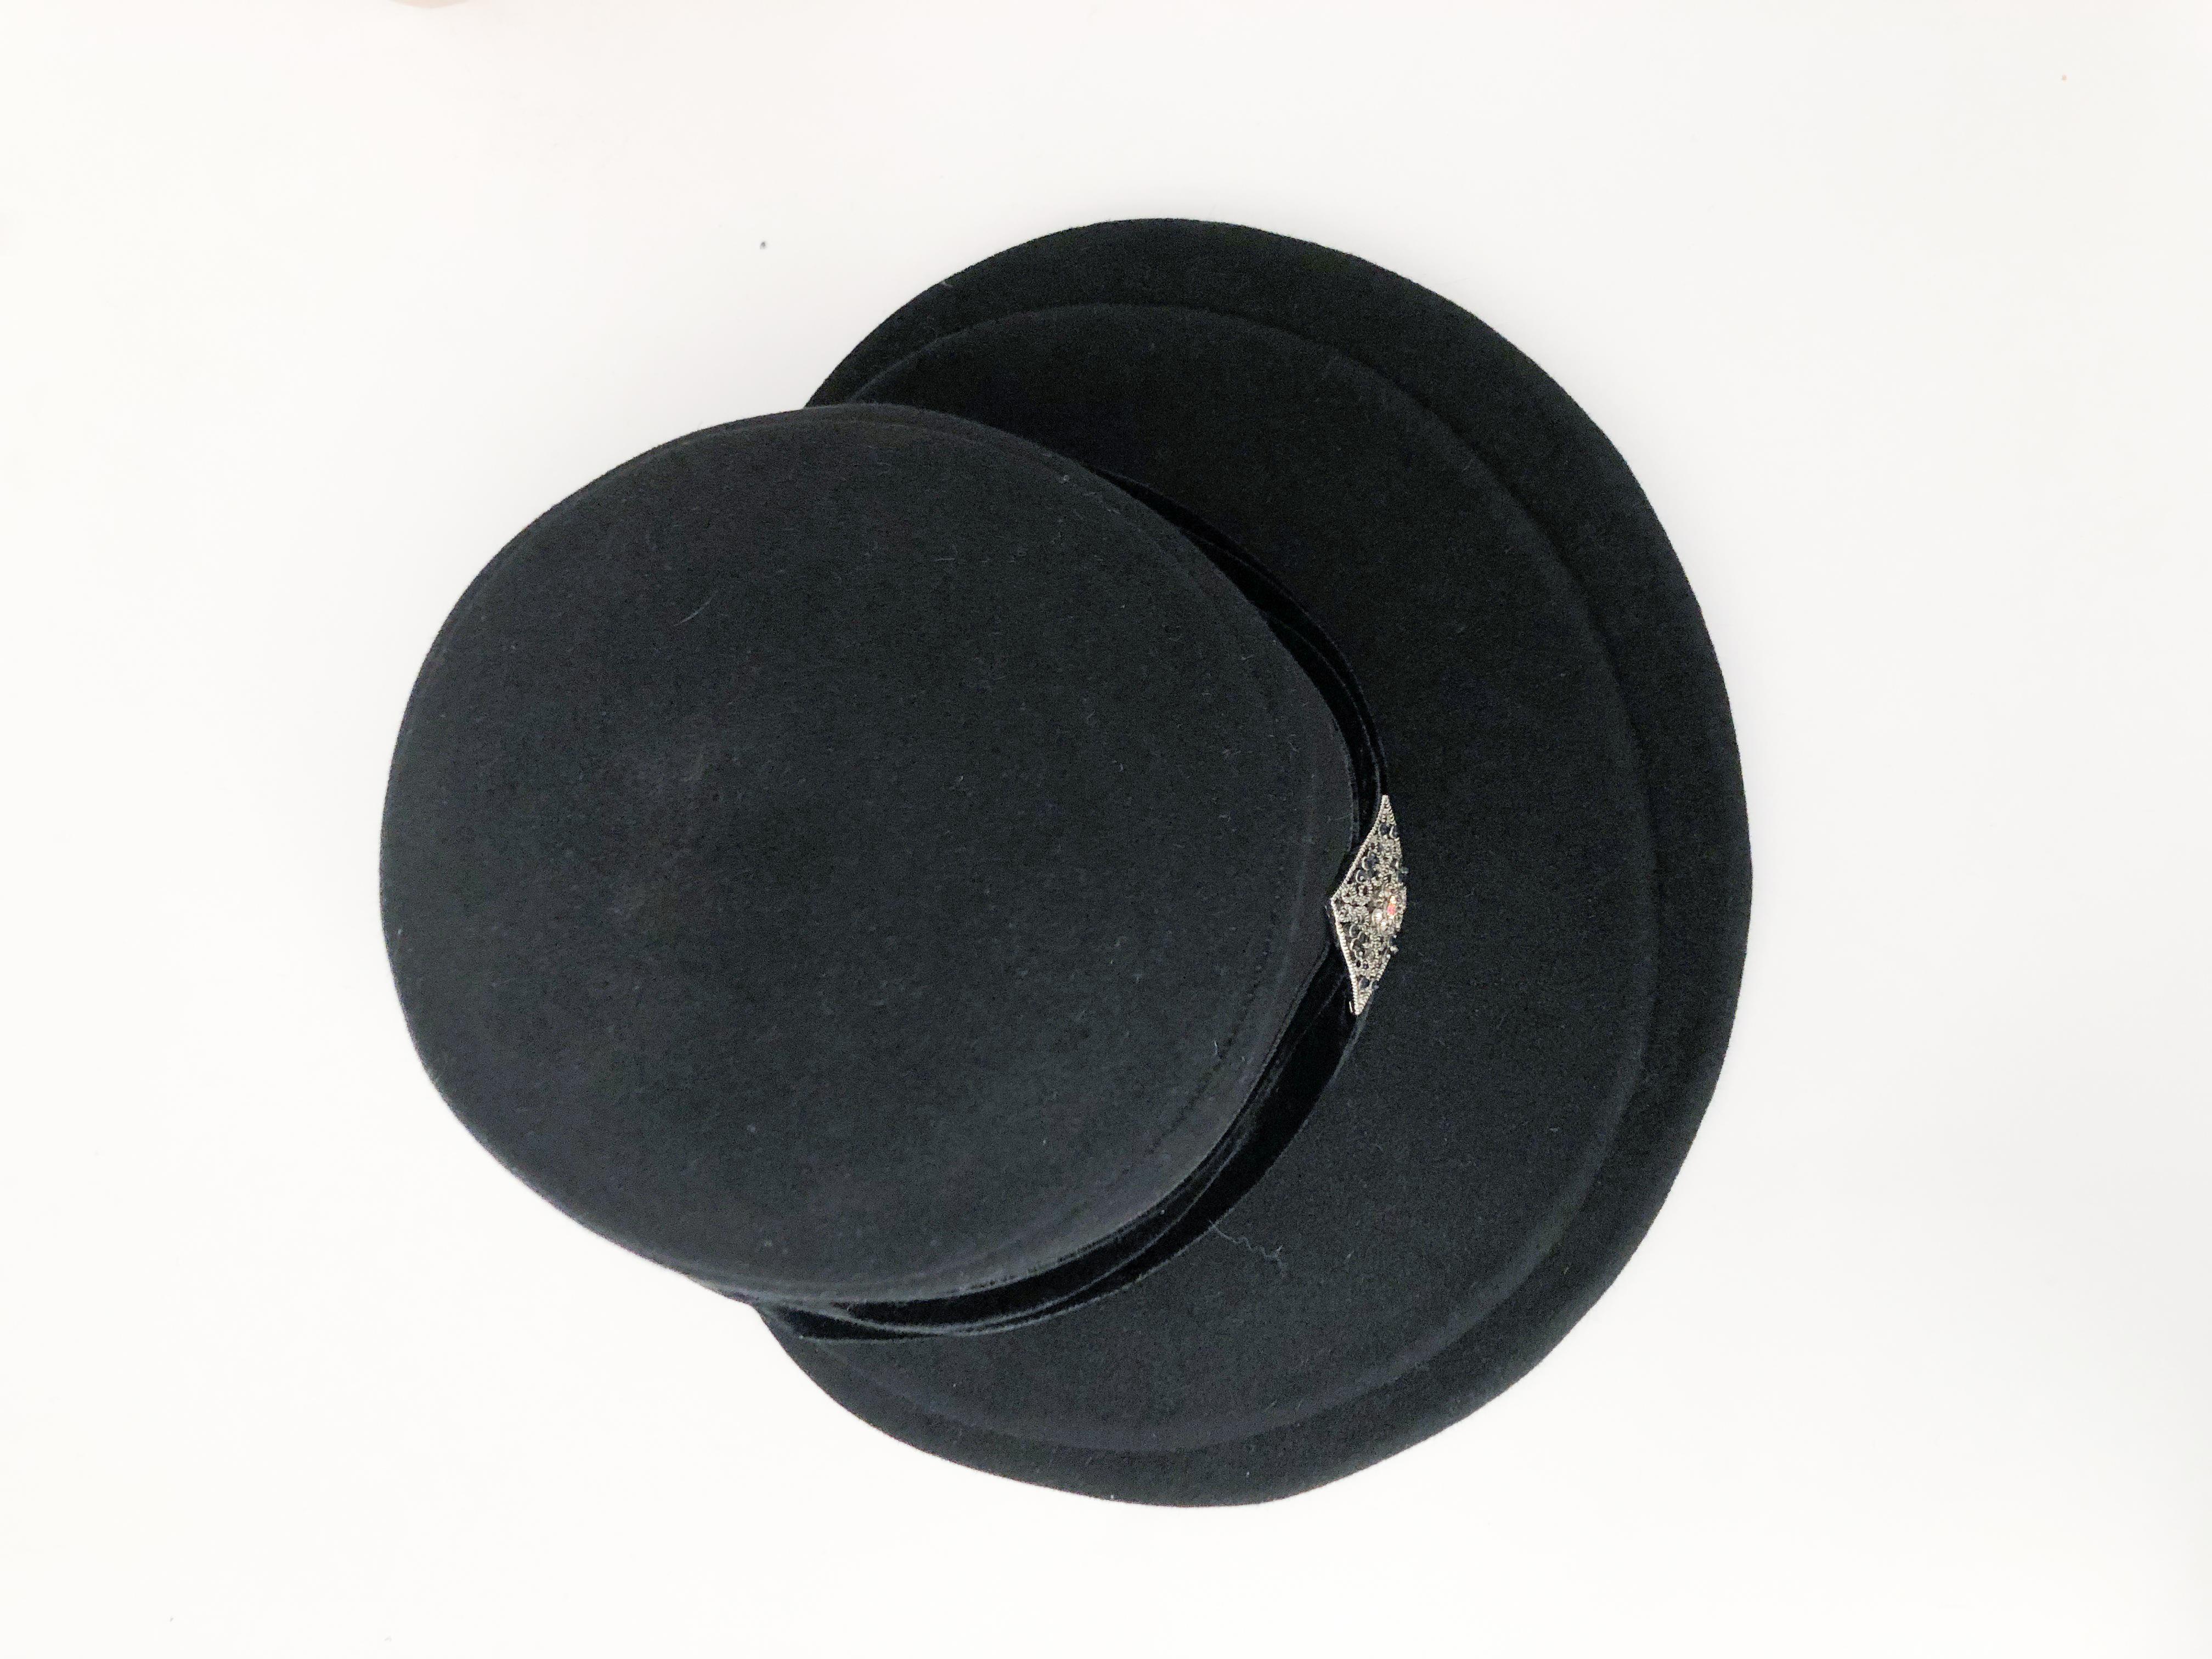 Women's 1940s Black Fur Felt Hat with Double Bill and Jeweled Accent For Sale